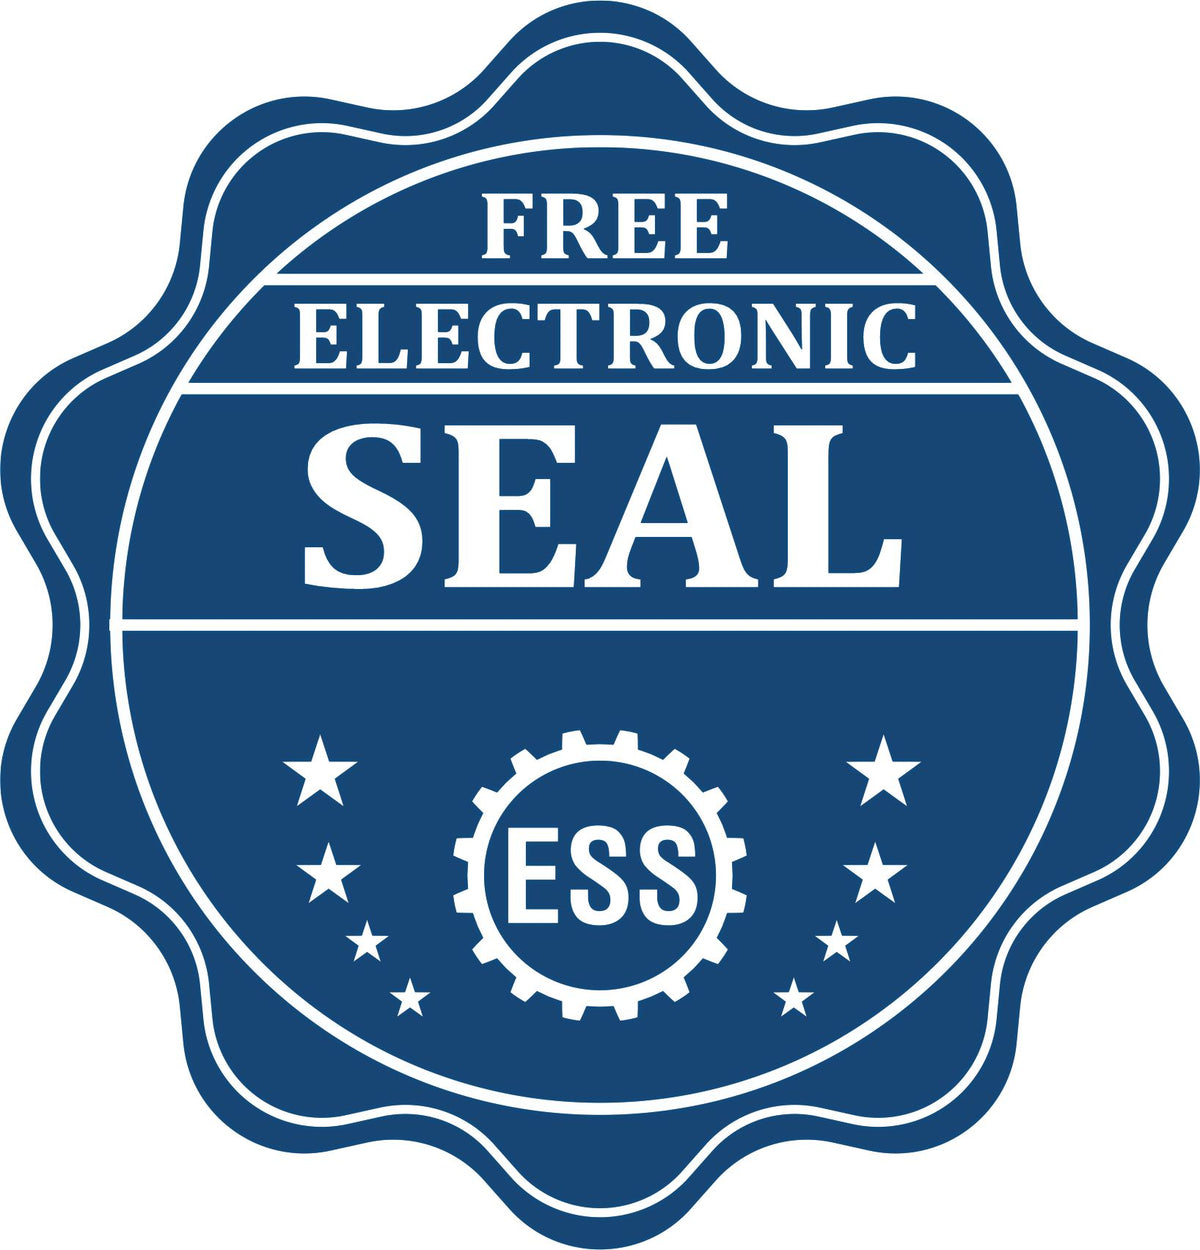 A badge showing a free electronic seal for the Hybrid Rhode Island Land Surveyor Seal with stars and the ESS gear on the emblem.